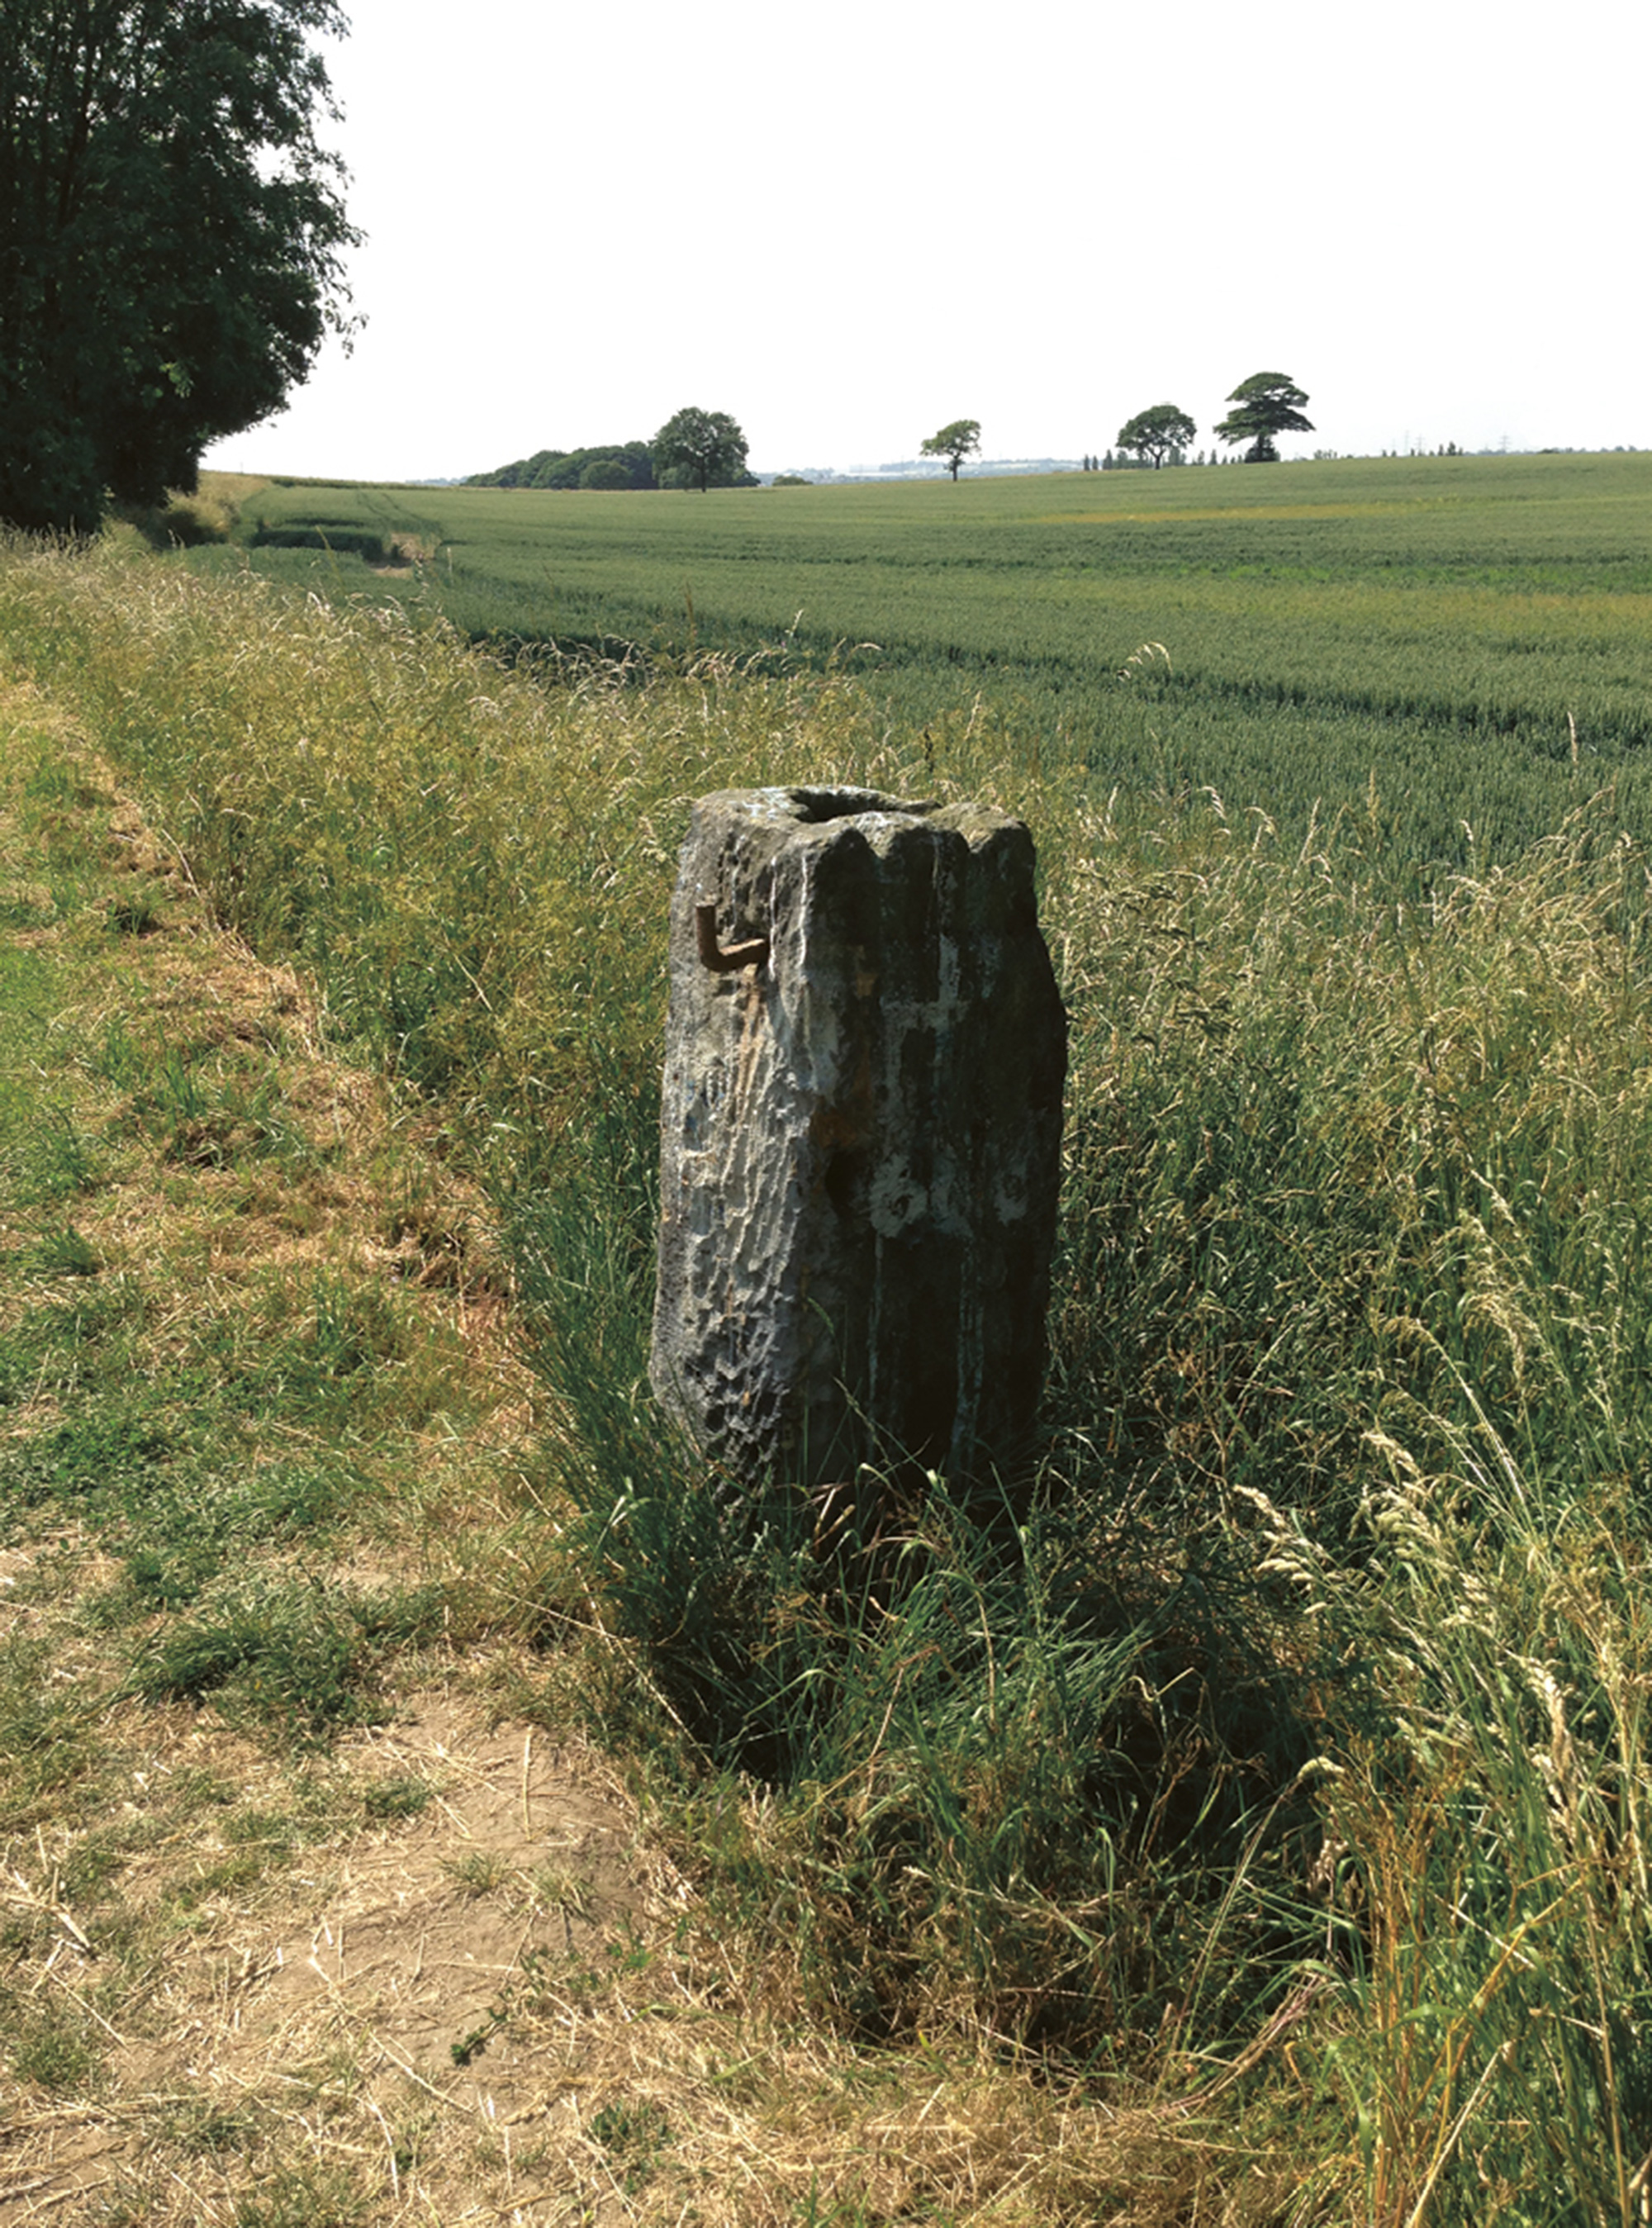 Artist Sophie Nys’s photograph of a plague stone at Altofts, West Yorkshire.